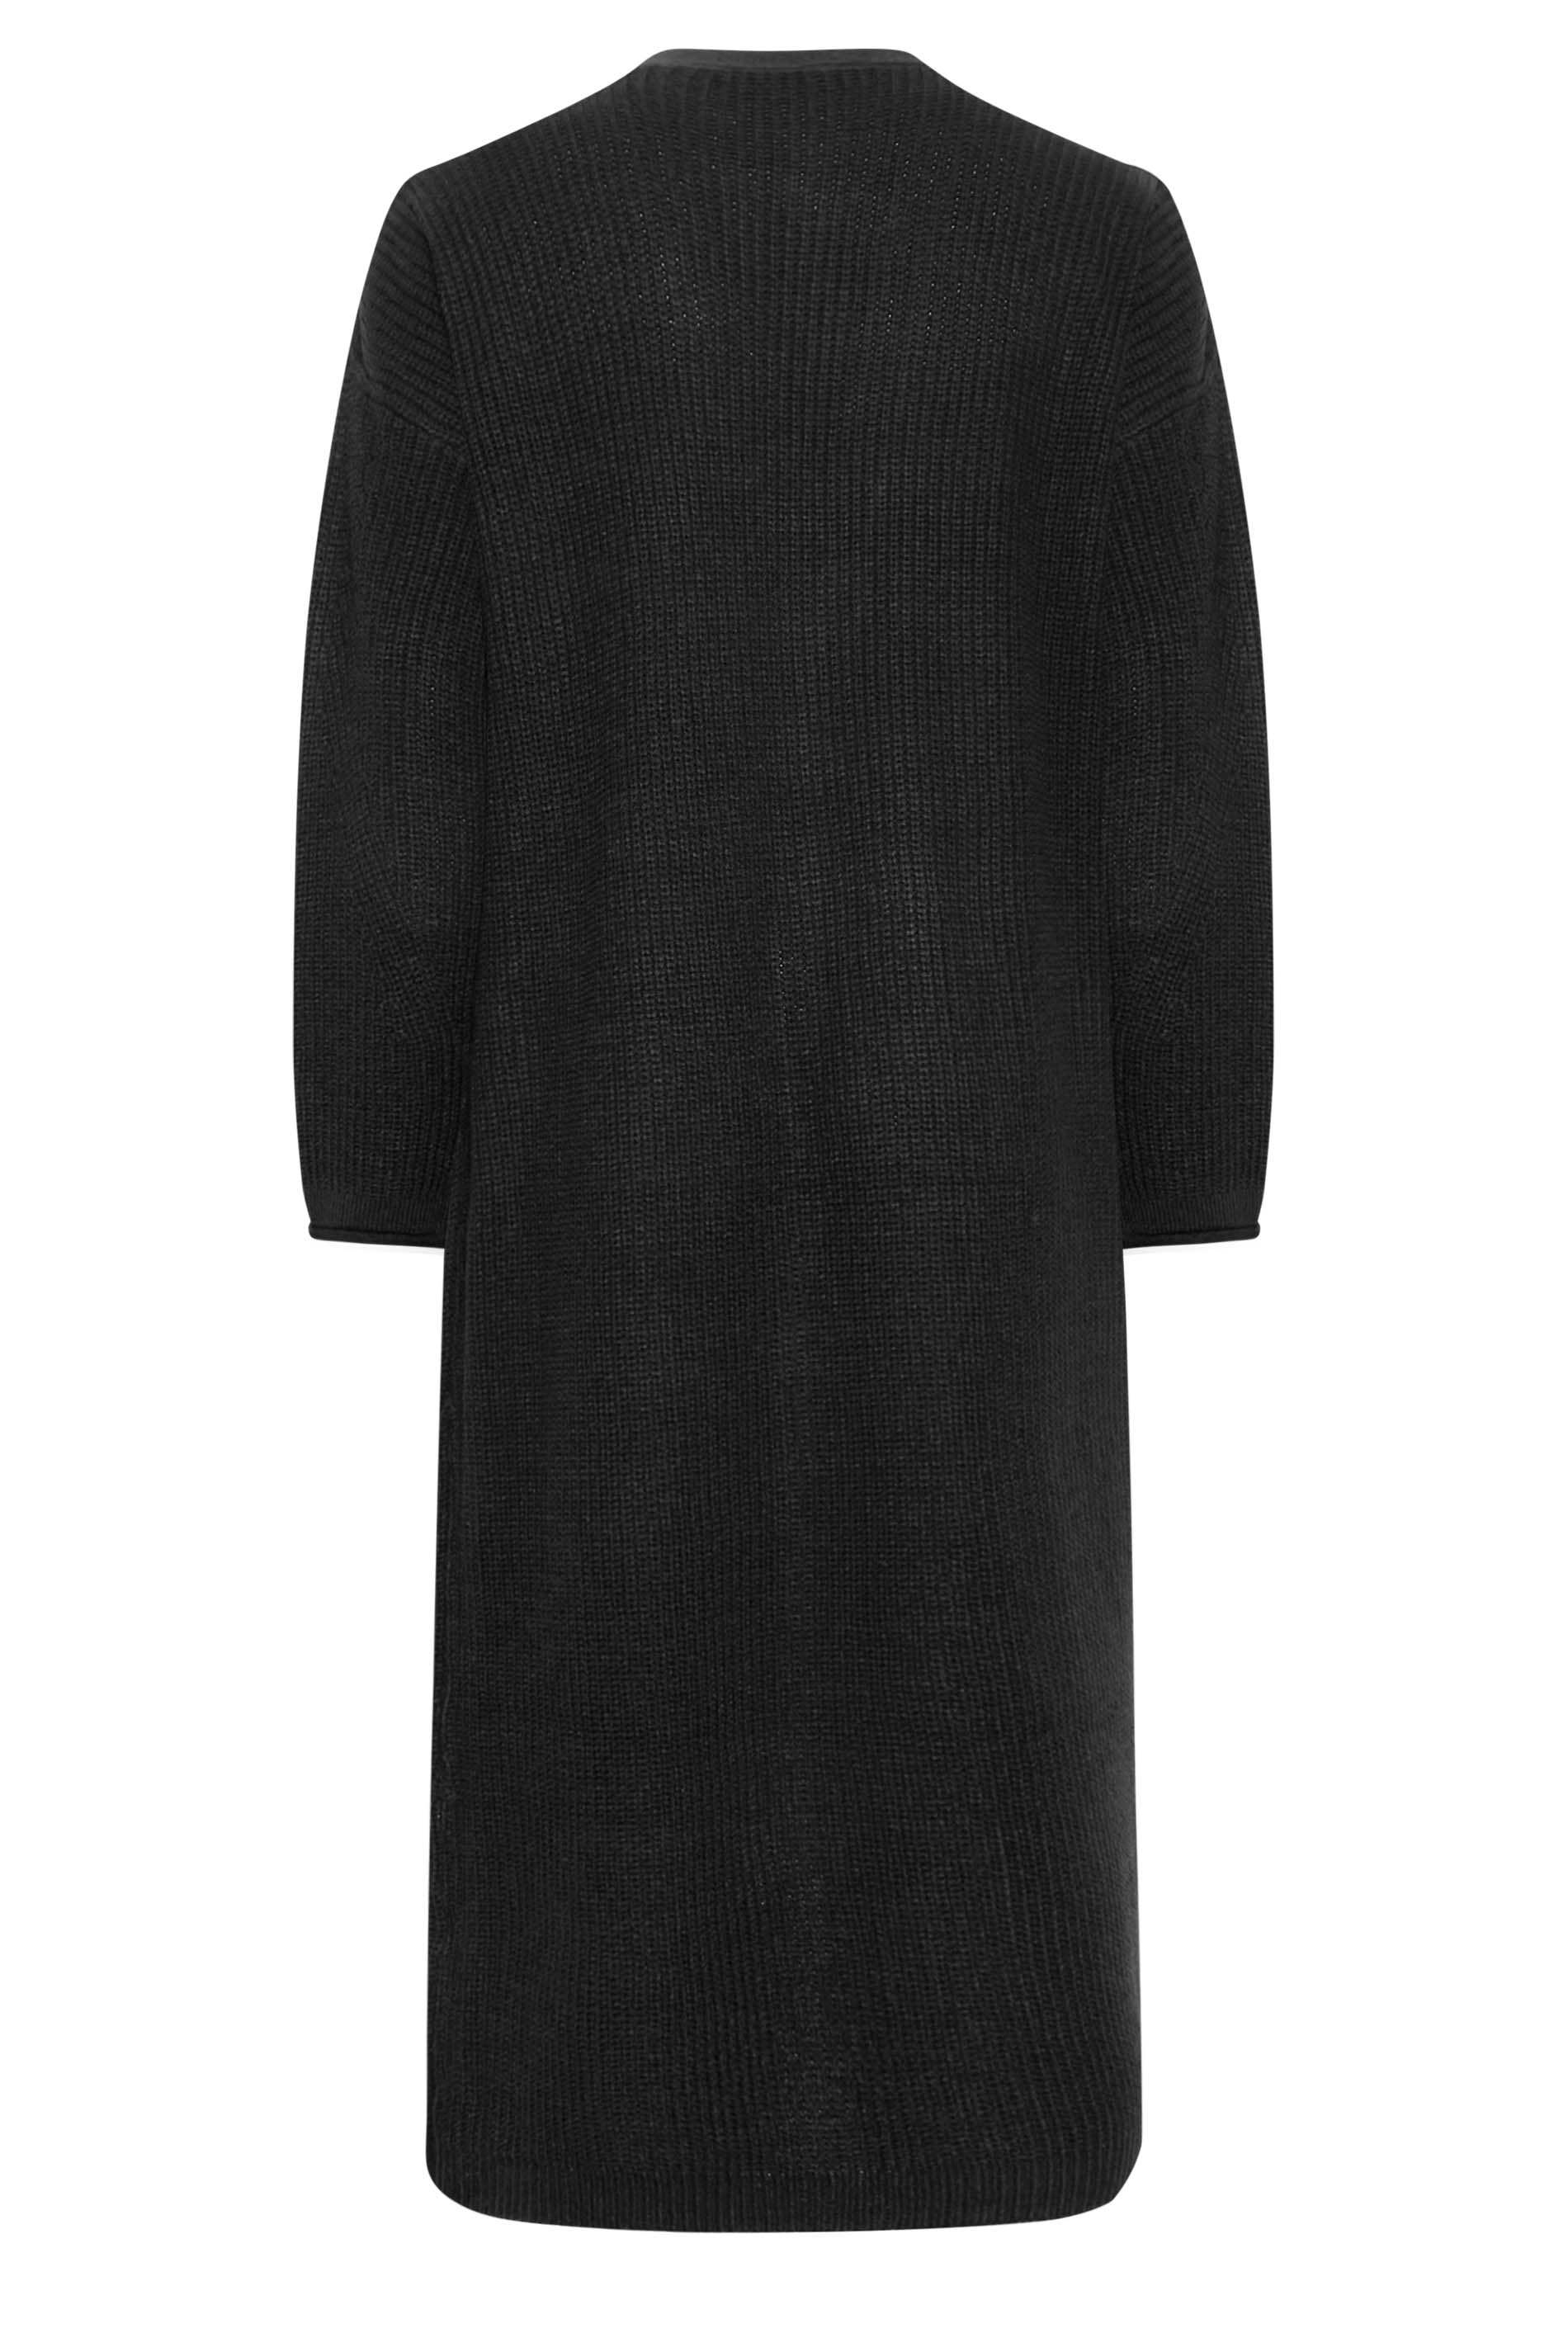 YOURS Plus Size Black Knitted Maxi Cardigan